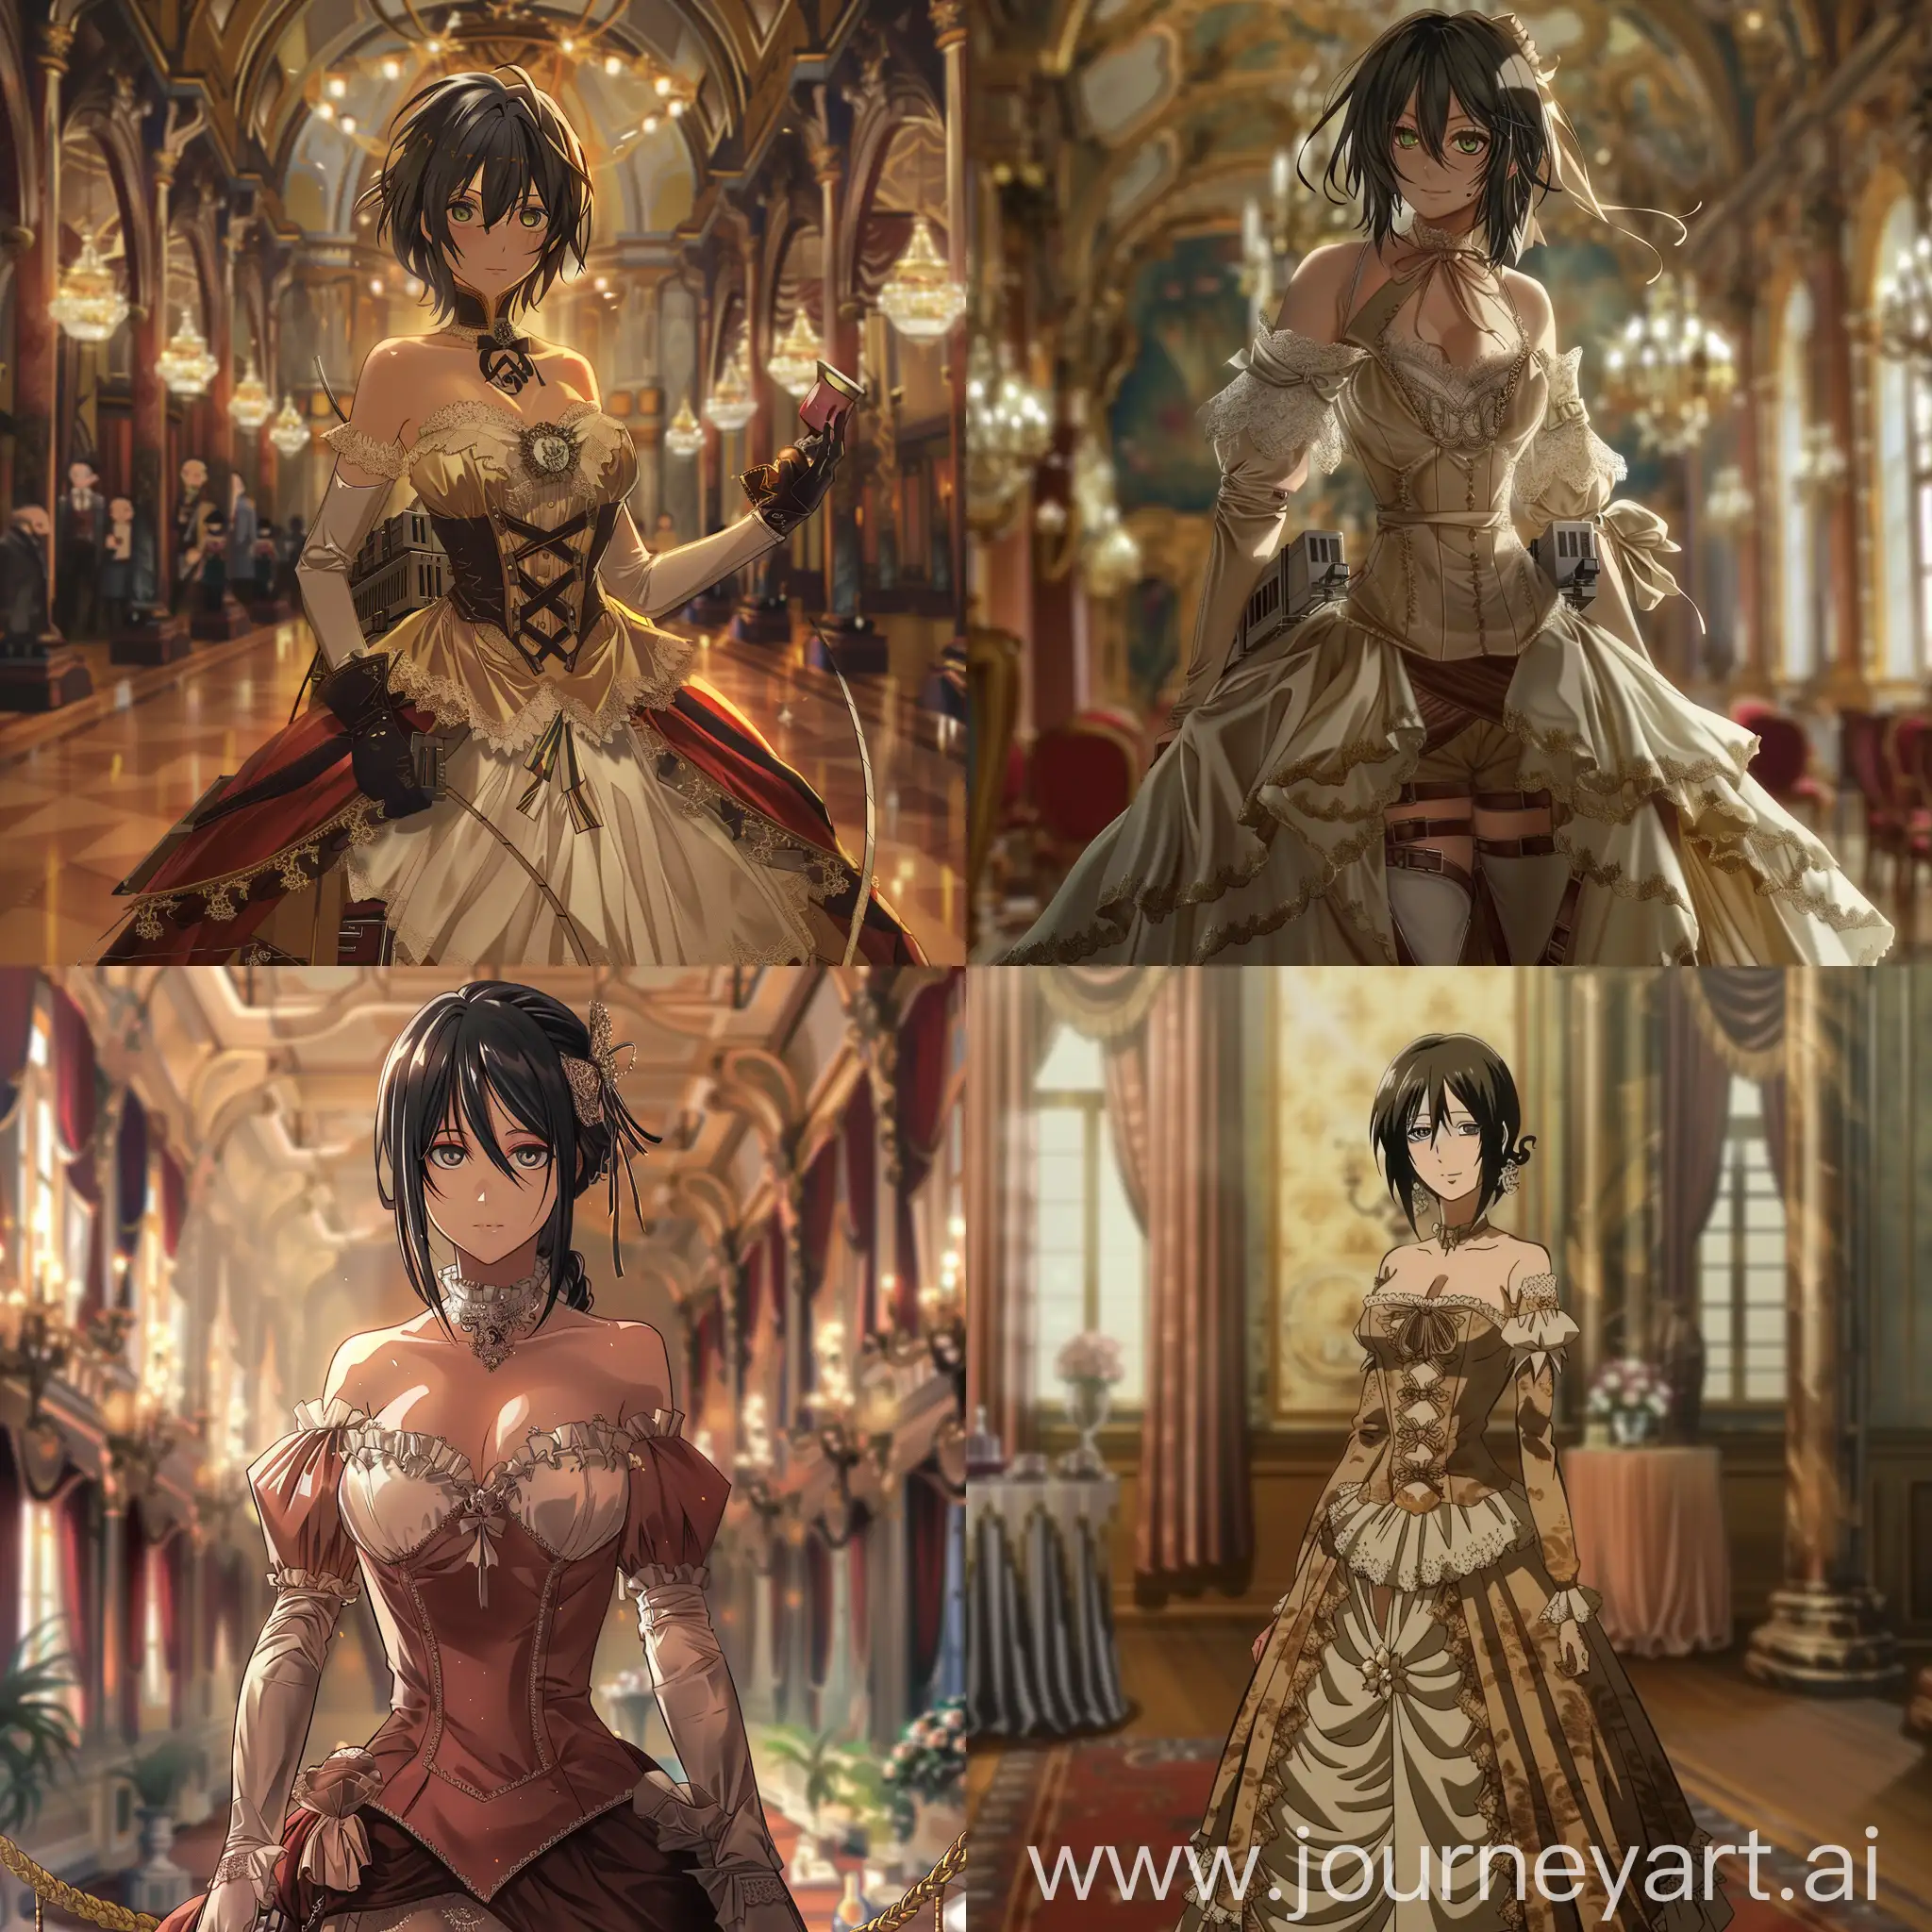 mikasa ackerman from aot dressed in a fancy dress for an event in a ball room, attack on titan wit studio art style s3 anime